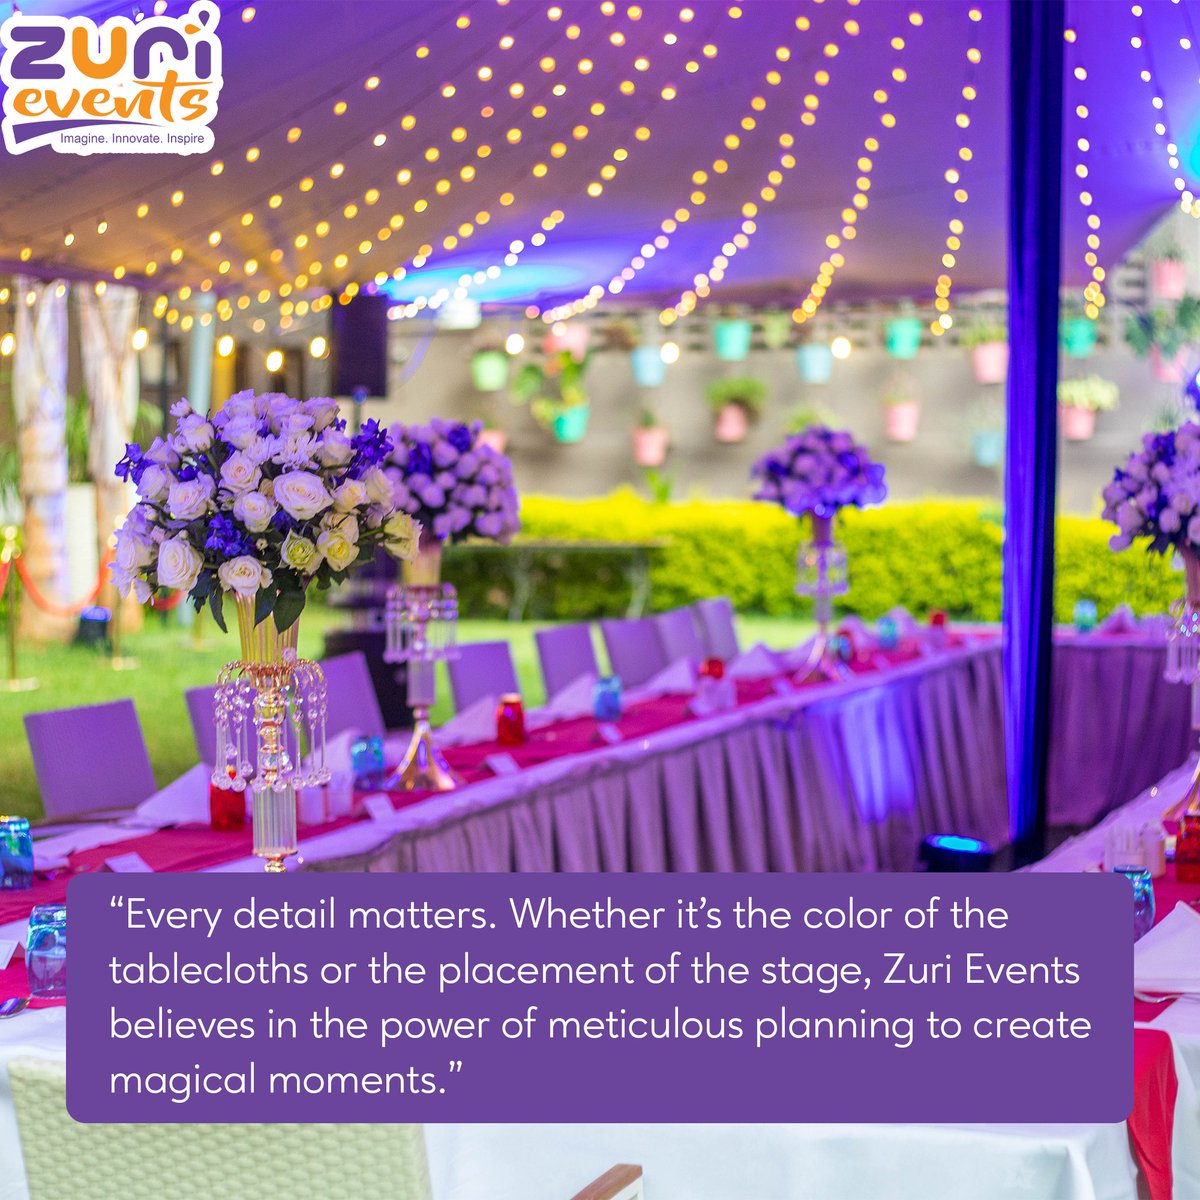 Every detail matters. Whether it's the color of the tablecloths or the placement of the stage, Zuri Events believes in the power of meticulous planning to create magical moments. ✨ #WisdomTuesday #AttentionToDetail'